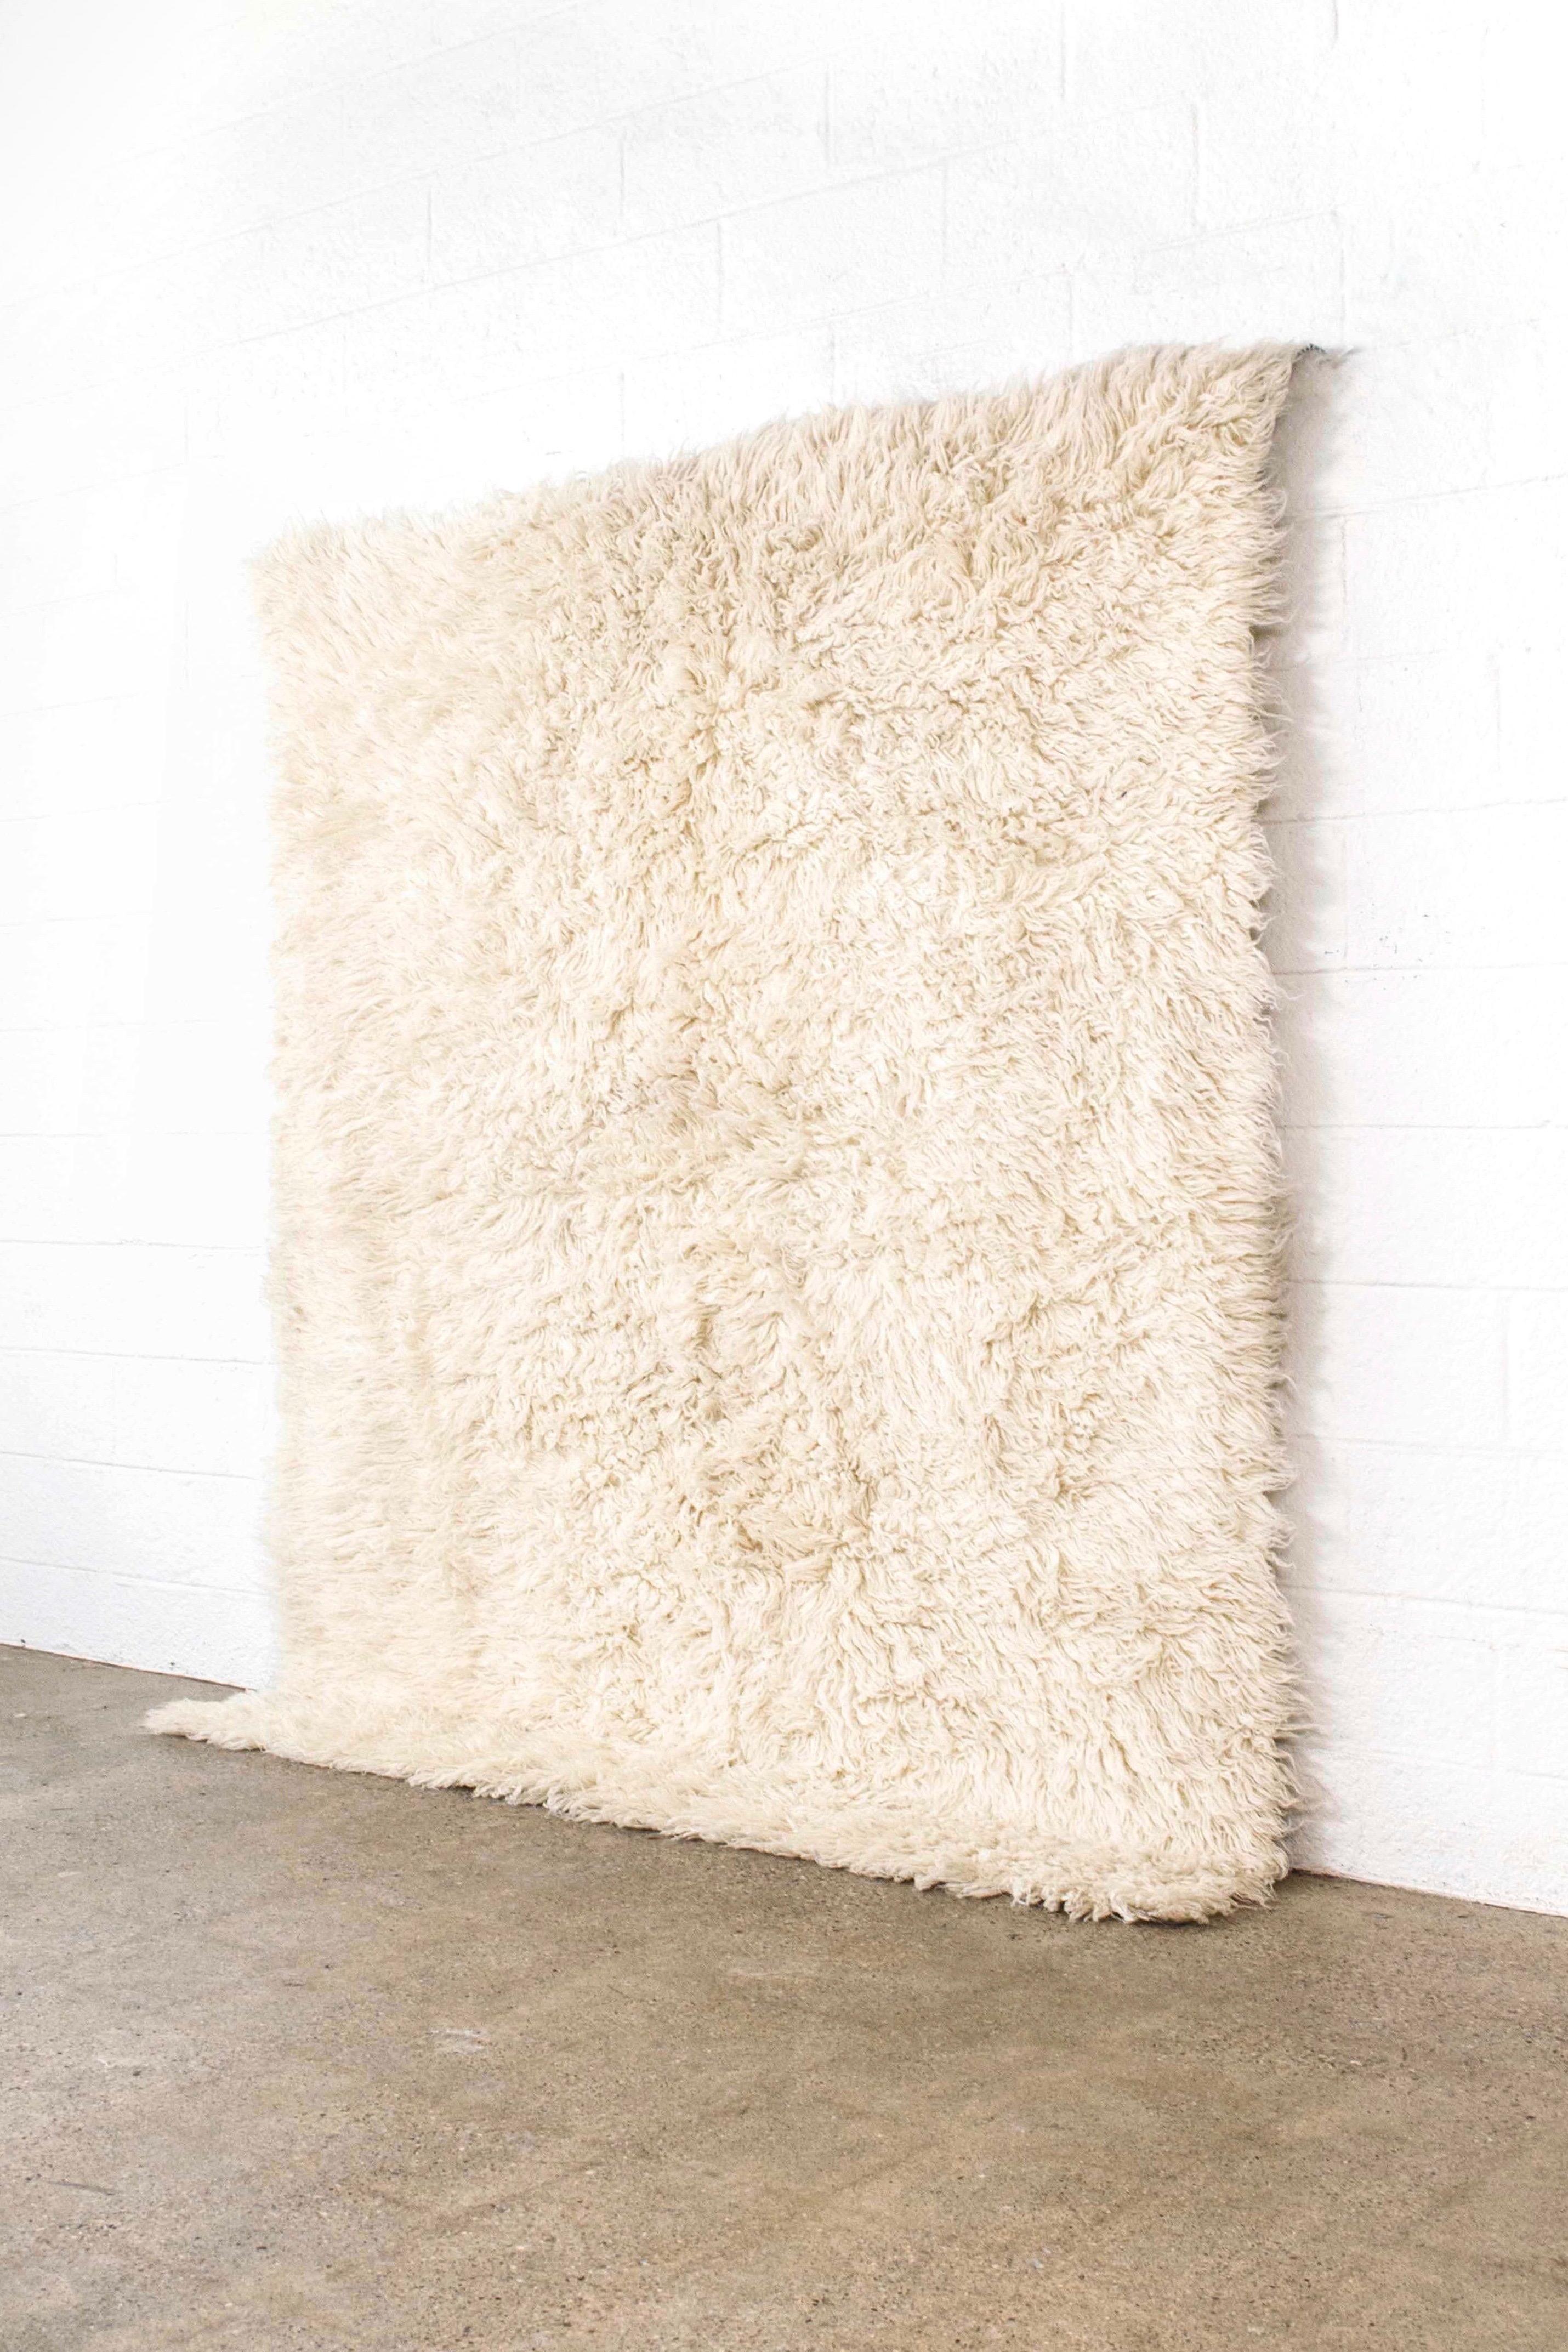 This beautiful large vintage wool shag rug circa 1970 is handwoven from 100% un-dyed wool and has a soft and luxurious thick shaggy pile. The clean, Minimalist design of this natural ivory carpet makes it the perfect complement for any contemporary